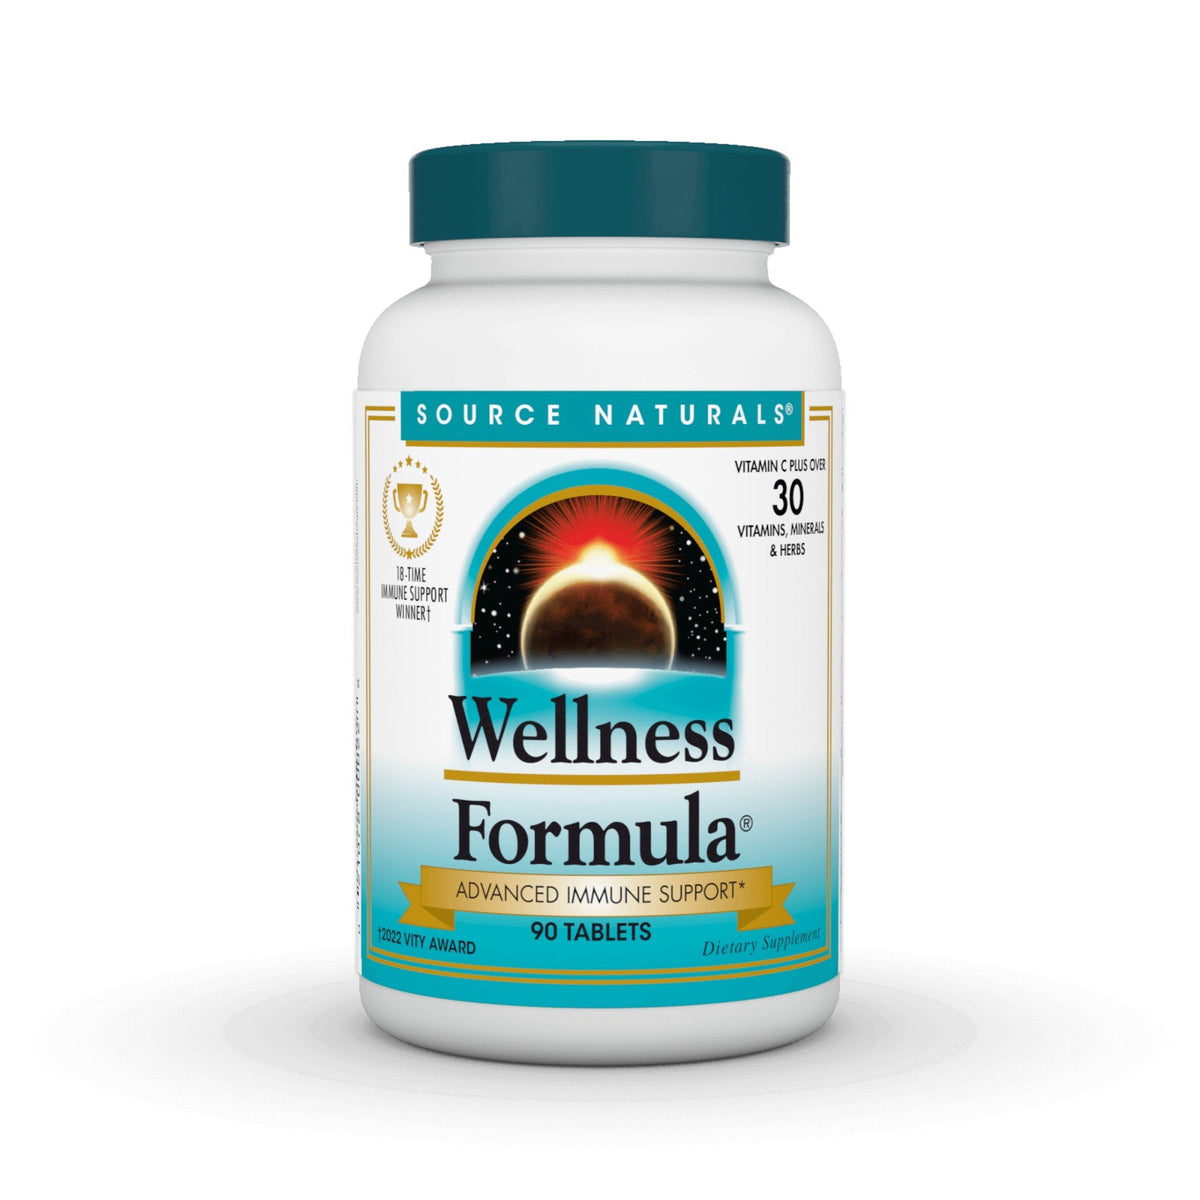 Wellness Formula | Source Naturals | Immune Support | Vitamin C | Over 30 Minerals, Vitamins, and Herbs | Dietary Supplement | 90 Tablets | VitaminLife